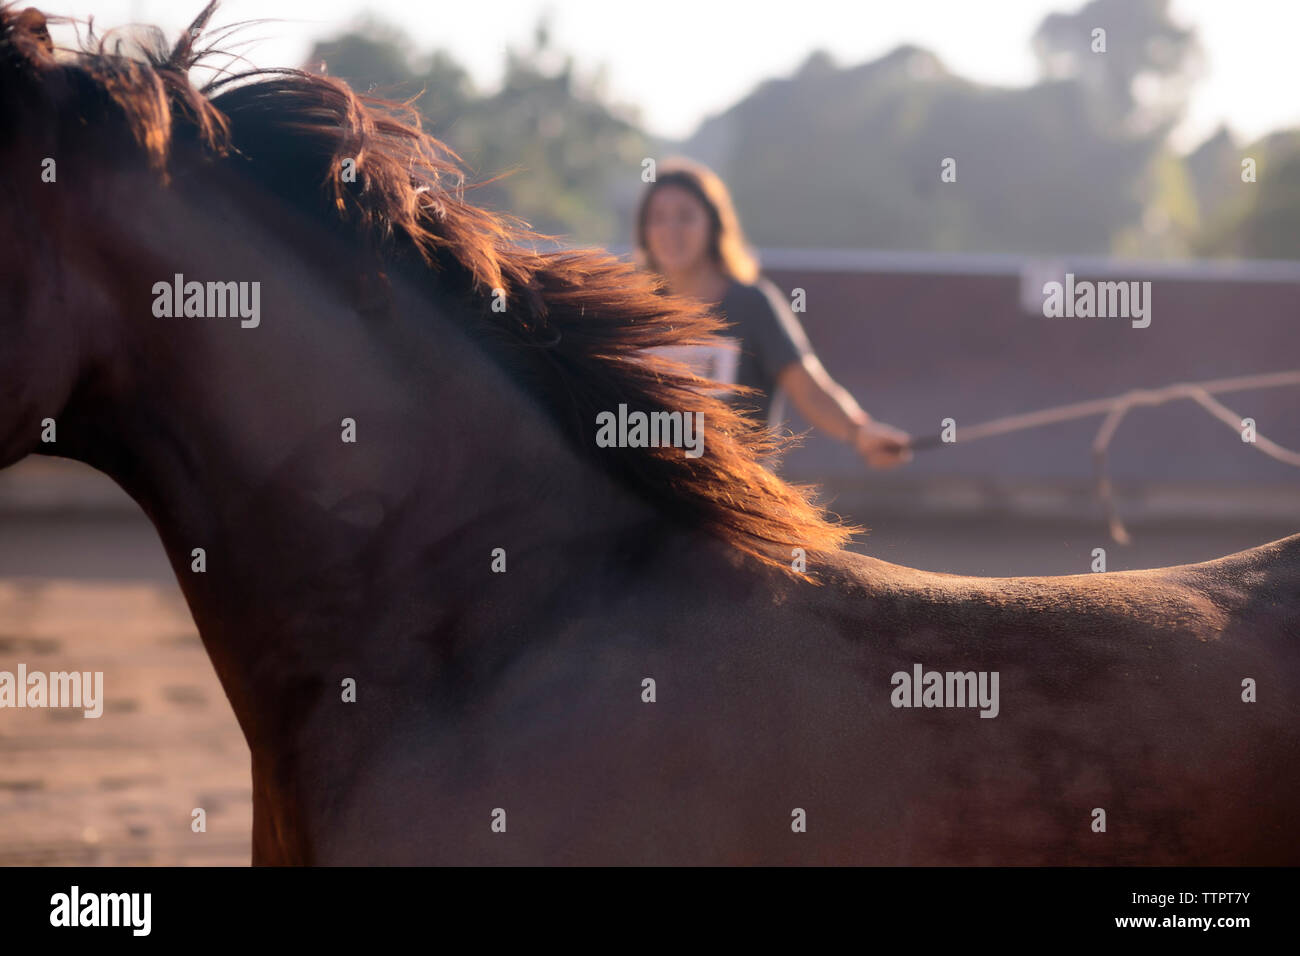 Close-up of horse with woman in background Stock Photo